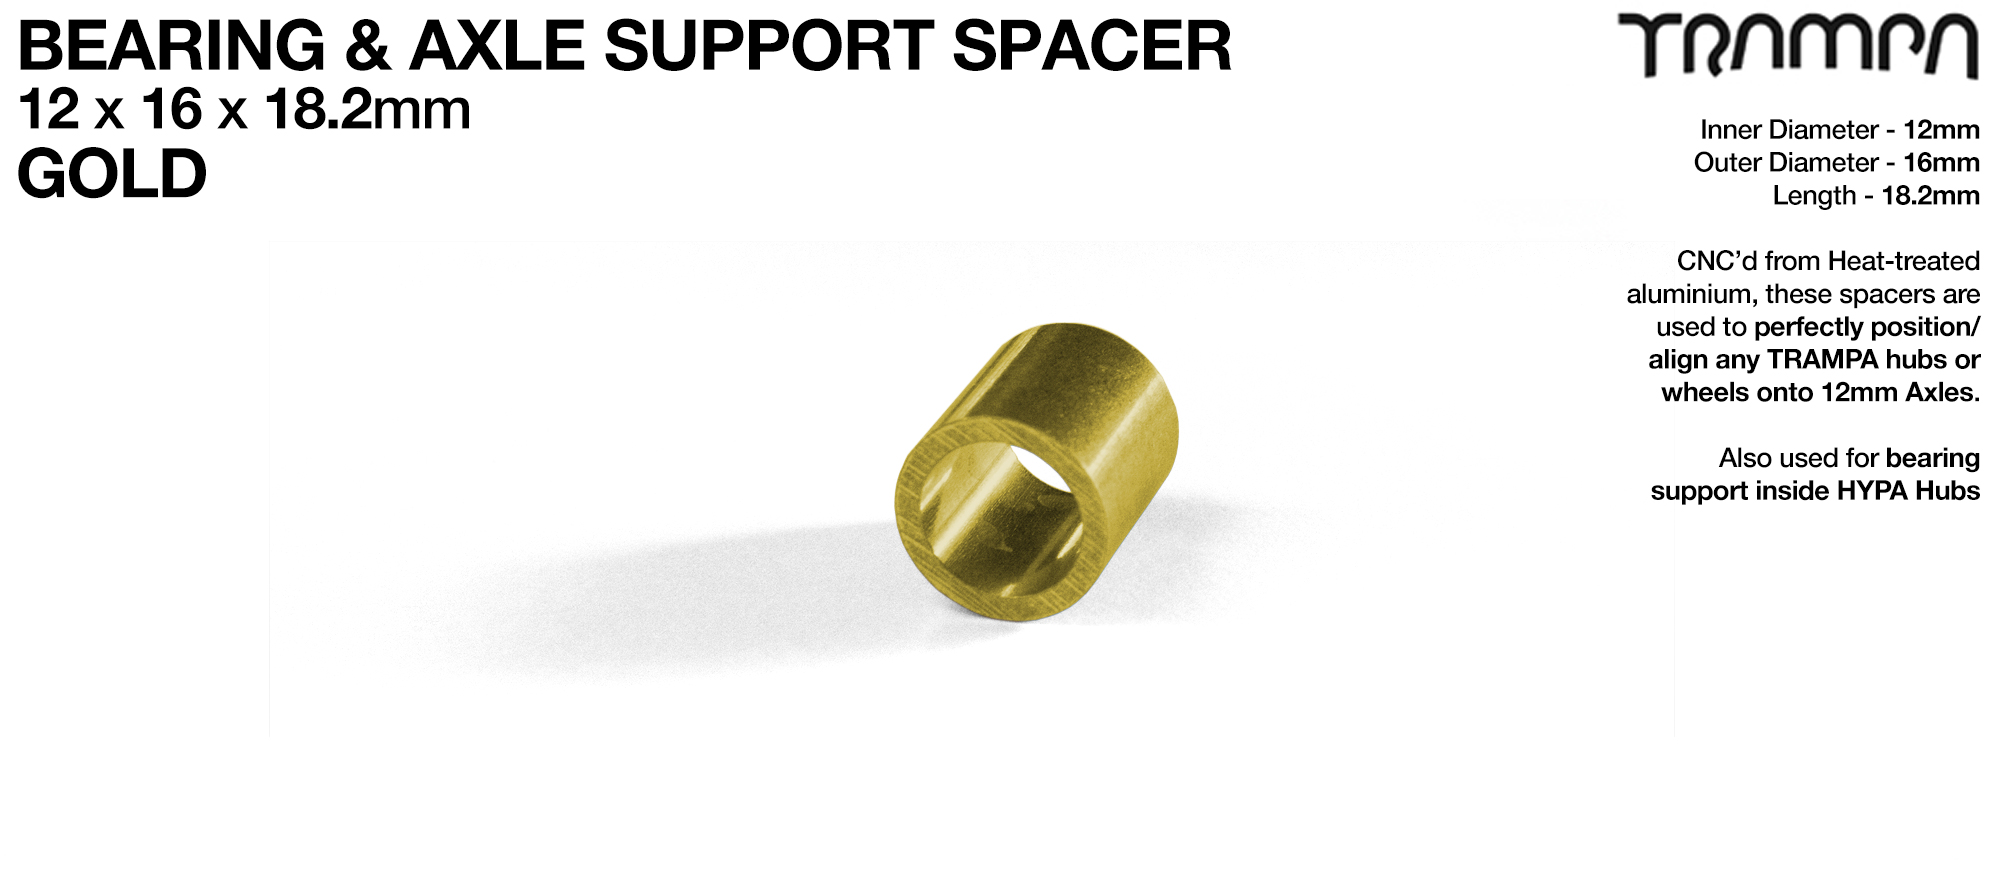 Wheel support spacer for all TRAMPA Wheels on 12mm ATB Axles - CNC precision 12mm x 16mm x 18.2mm  - GOLD